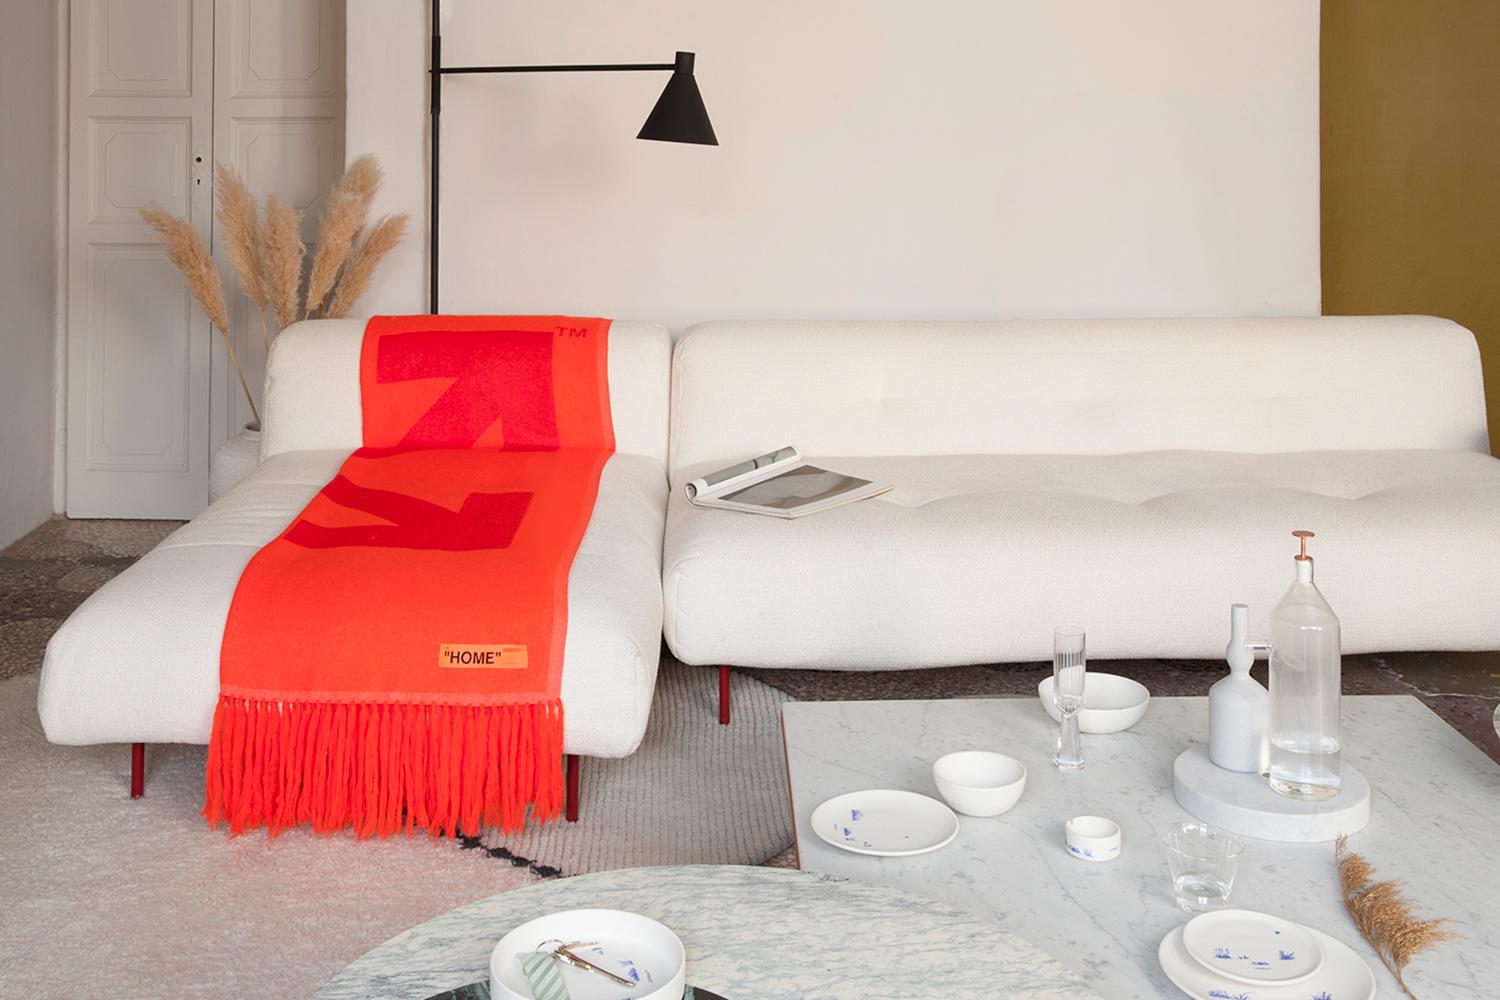 Virgil Abloh Collaborates With Vitra on Limited-Edition Furniture